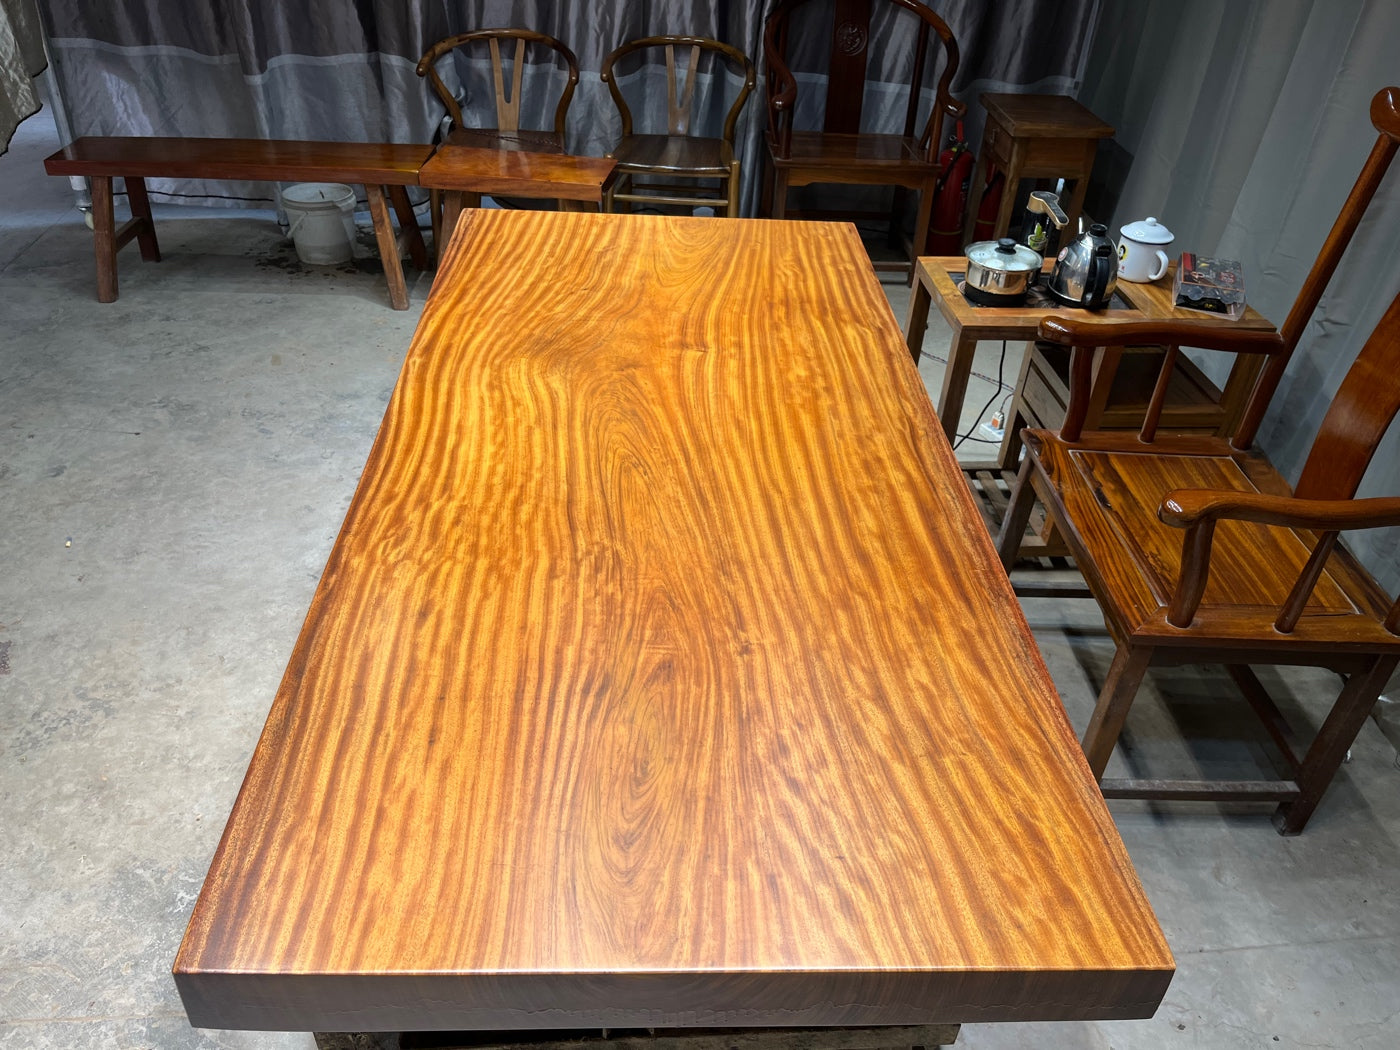 African wooden slab coffee table, Tali wooden slab table, live edge slabs for tables